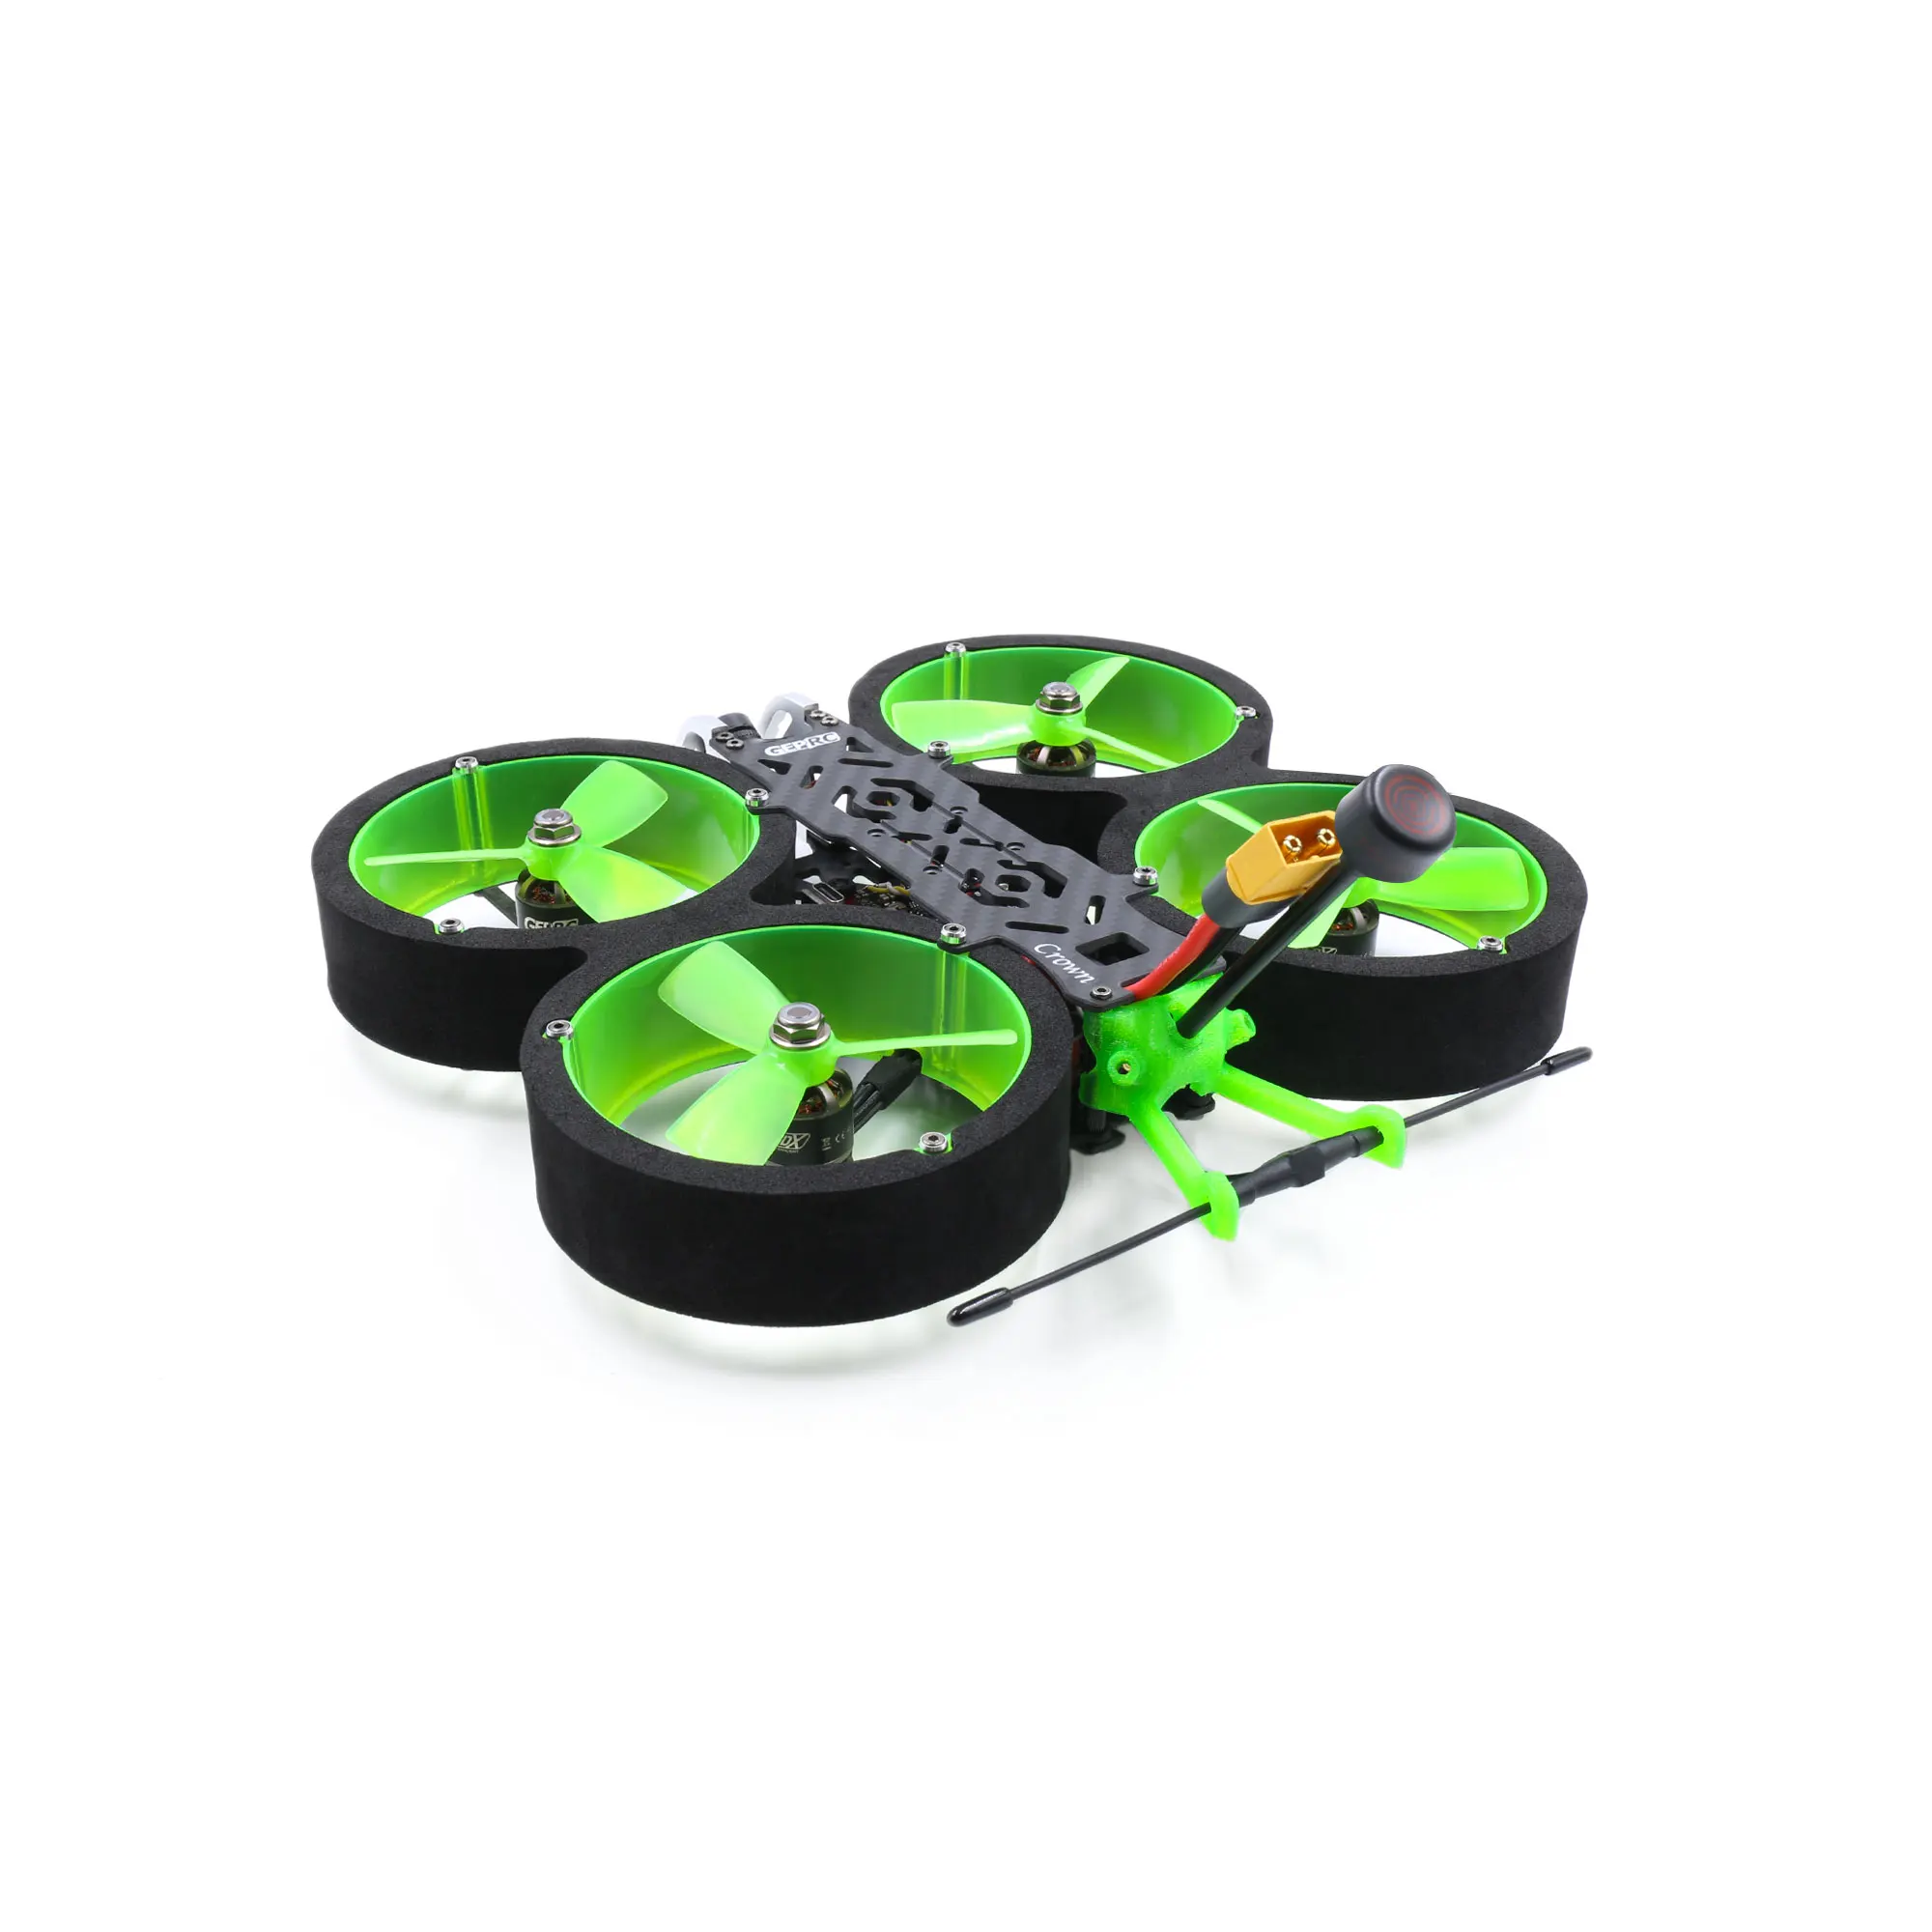 GEPRC Crown Analog SPAN F722 HD 45A 600mW Caddx Ratel V2 1408 3500KV 4S 2500KV 6S 156mm 3inch FPV Cinewhoop Ducted Drone 5